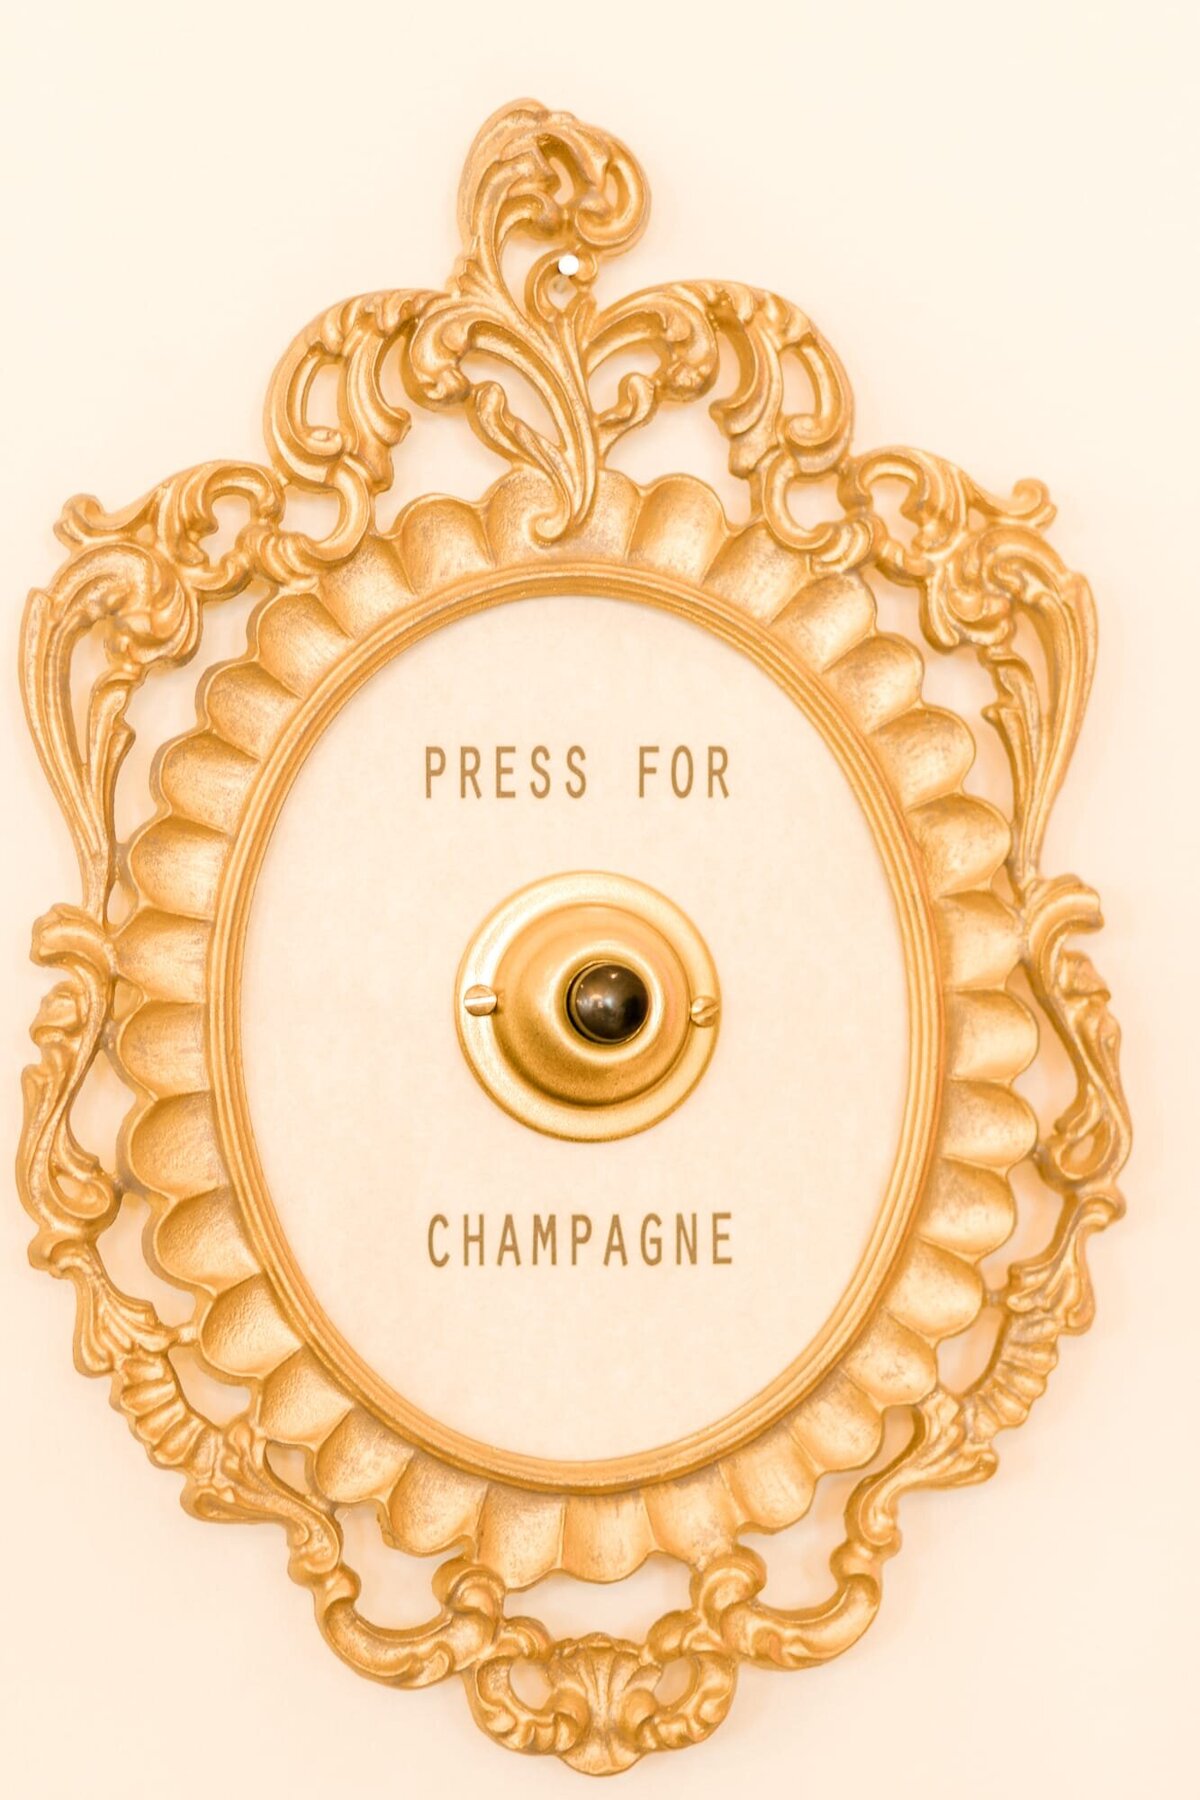 Button that says "press for champagne"